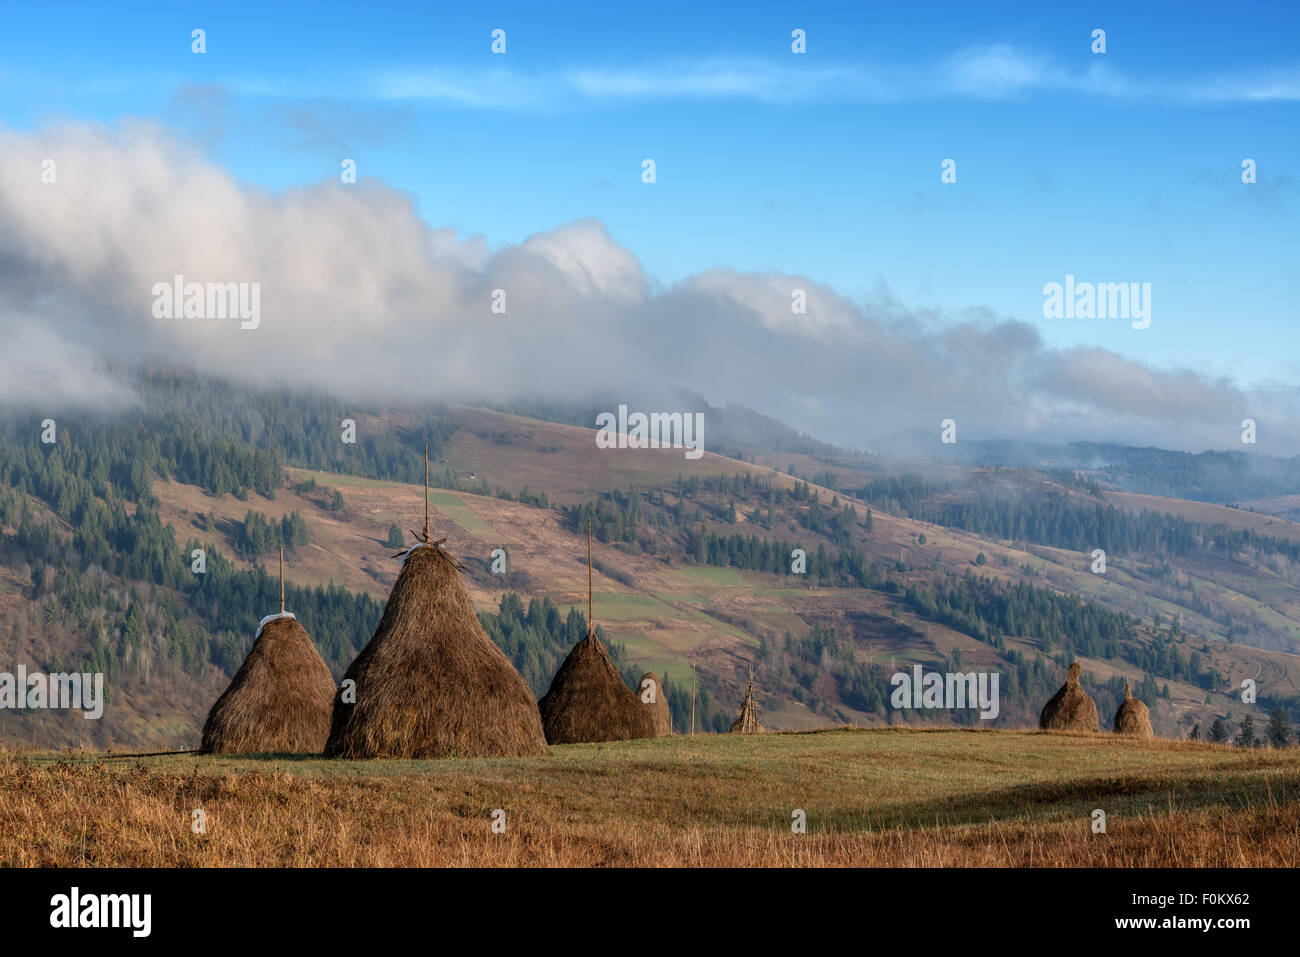 Amazing rural scene on autumn valley. Wooden fence and haystack on a foreground. Carpathians, Ukraine, Europe. Stock Photo